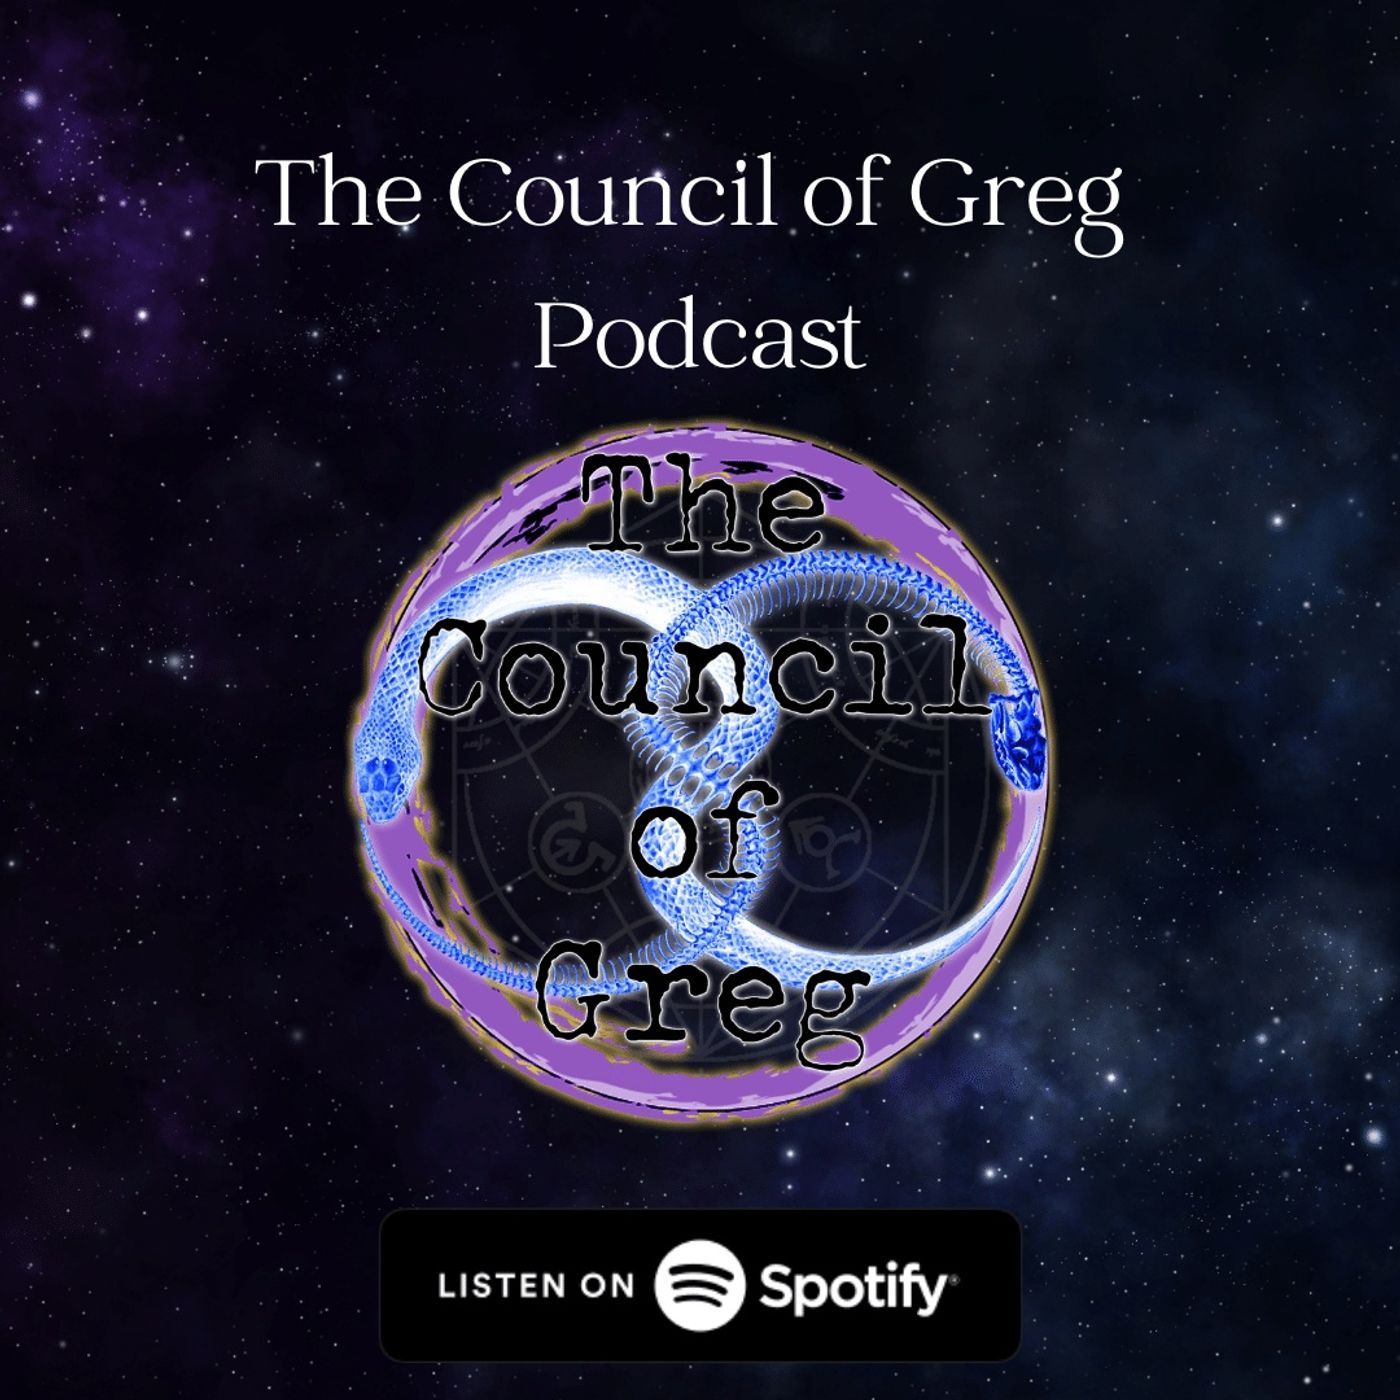 BONUS EPISODE: Round Table Discussion with the Council of Greg Hosts